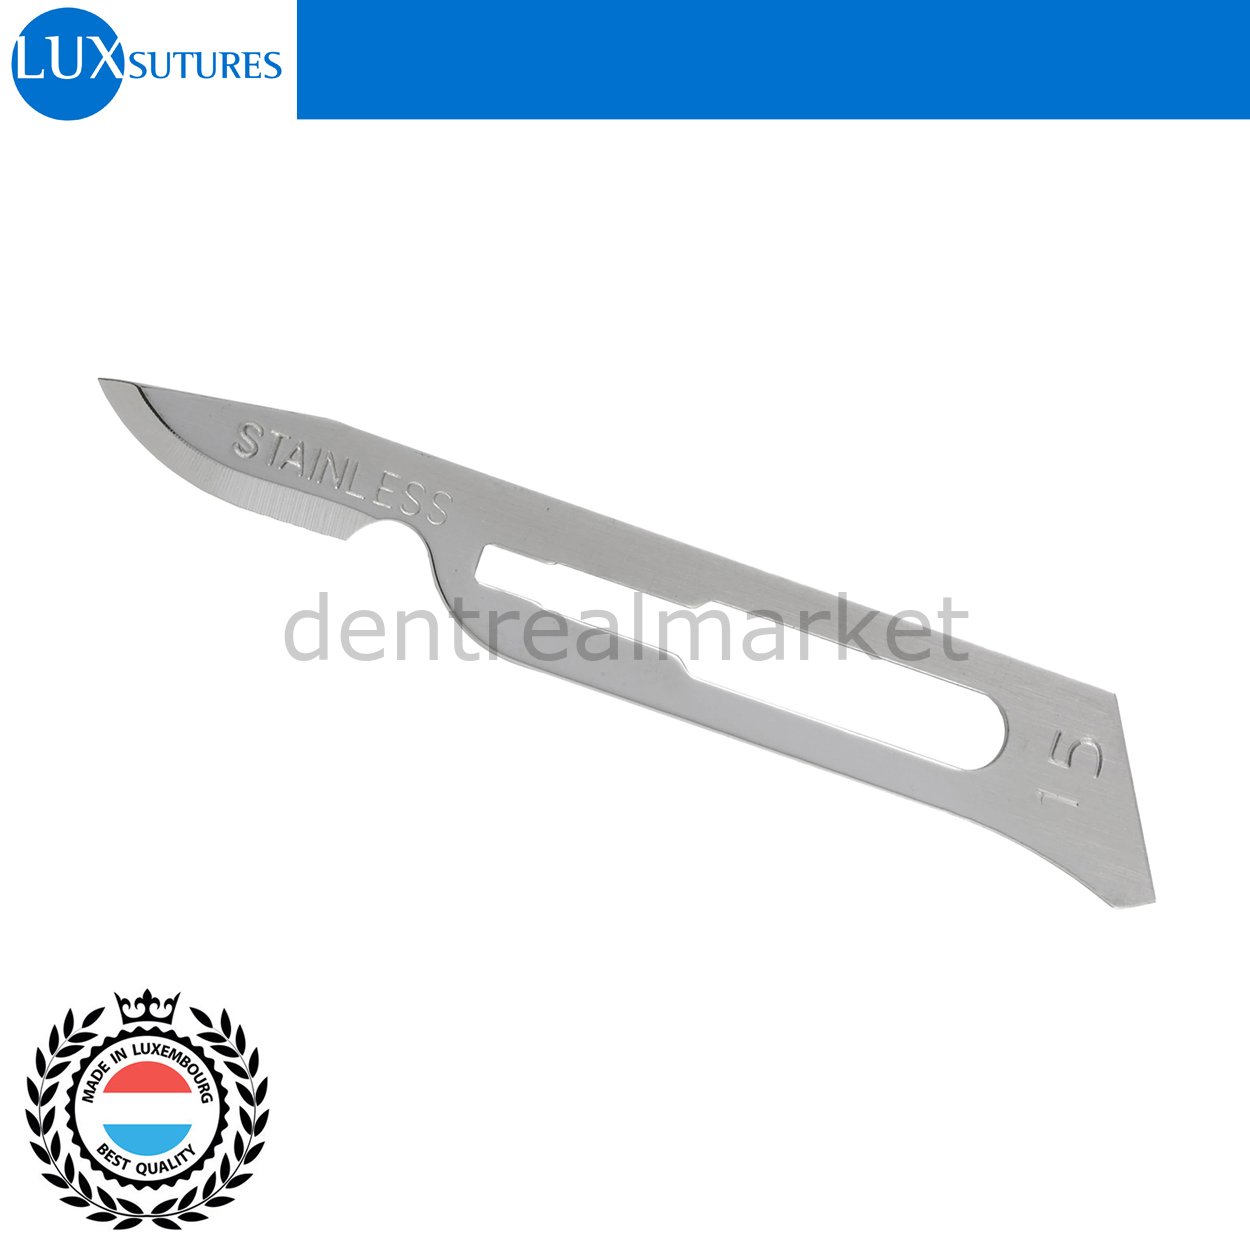 DentrealStore - LuxSutures Surgical Scalpel Sterile Blades Tip 15C - 5 Box Surgical Blade